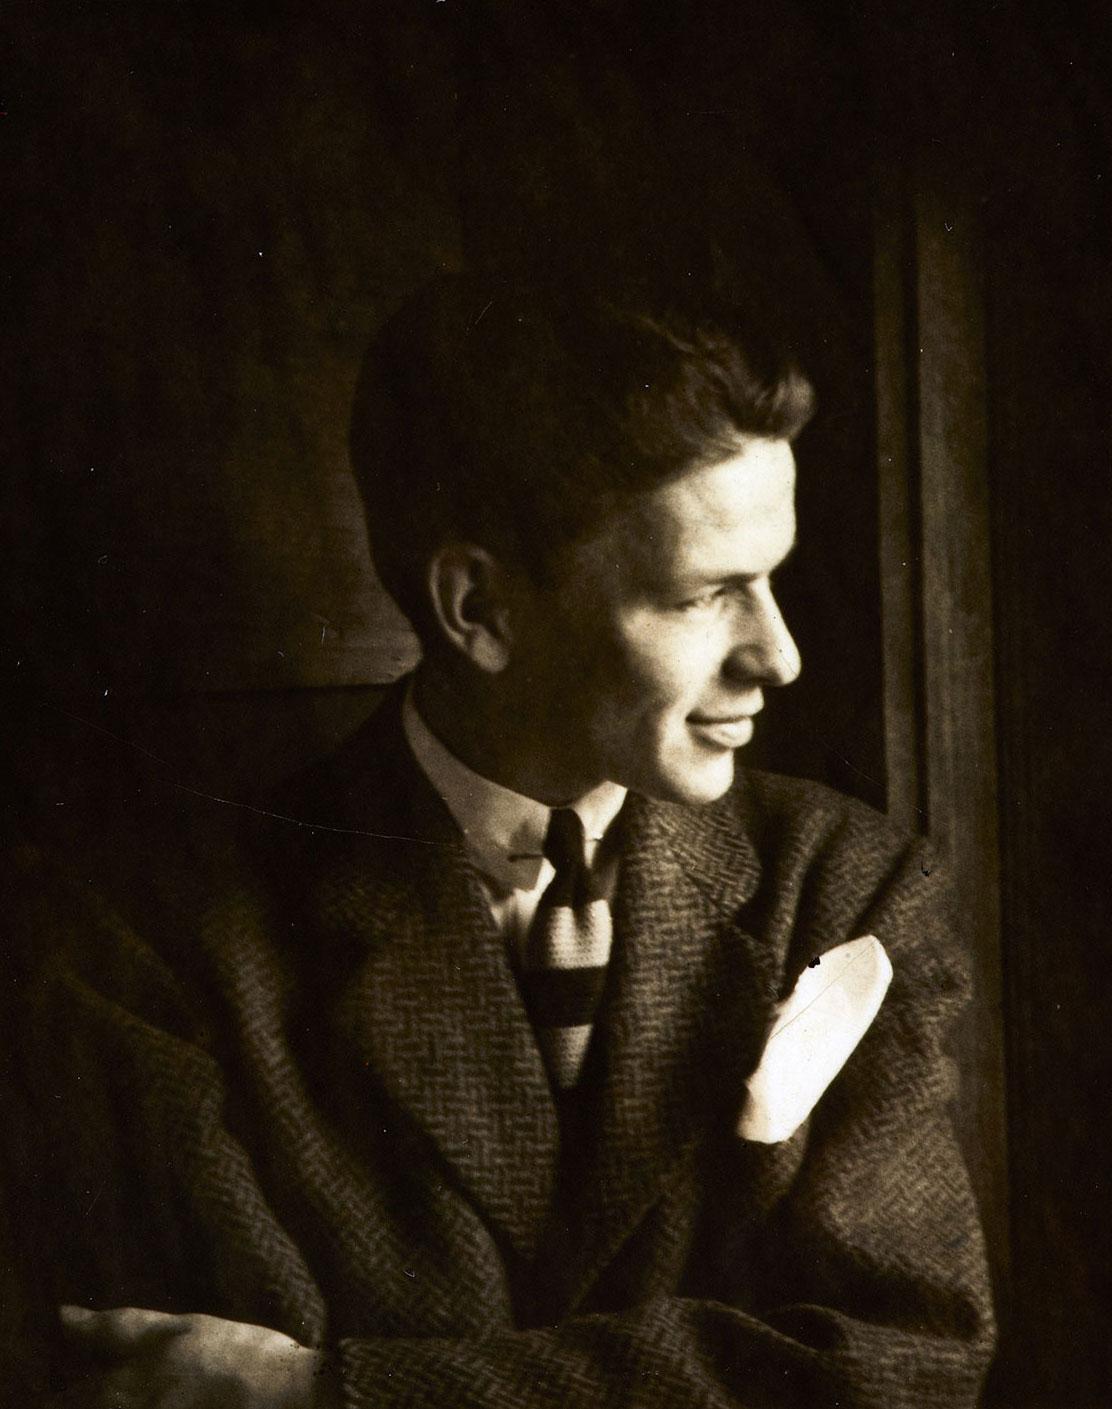 Unknown Portrait Photograph - Frank Sinatra - Looking out - New Jersey -  Estate Stamped